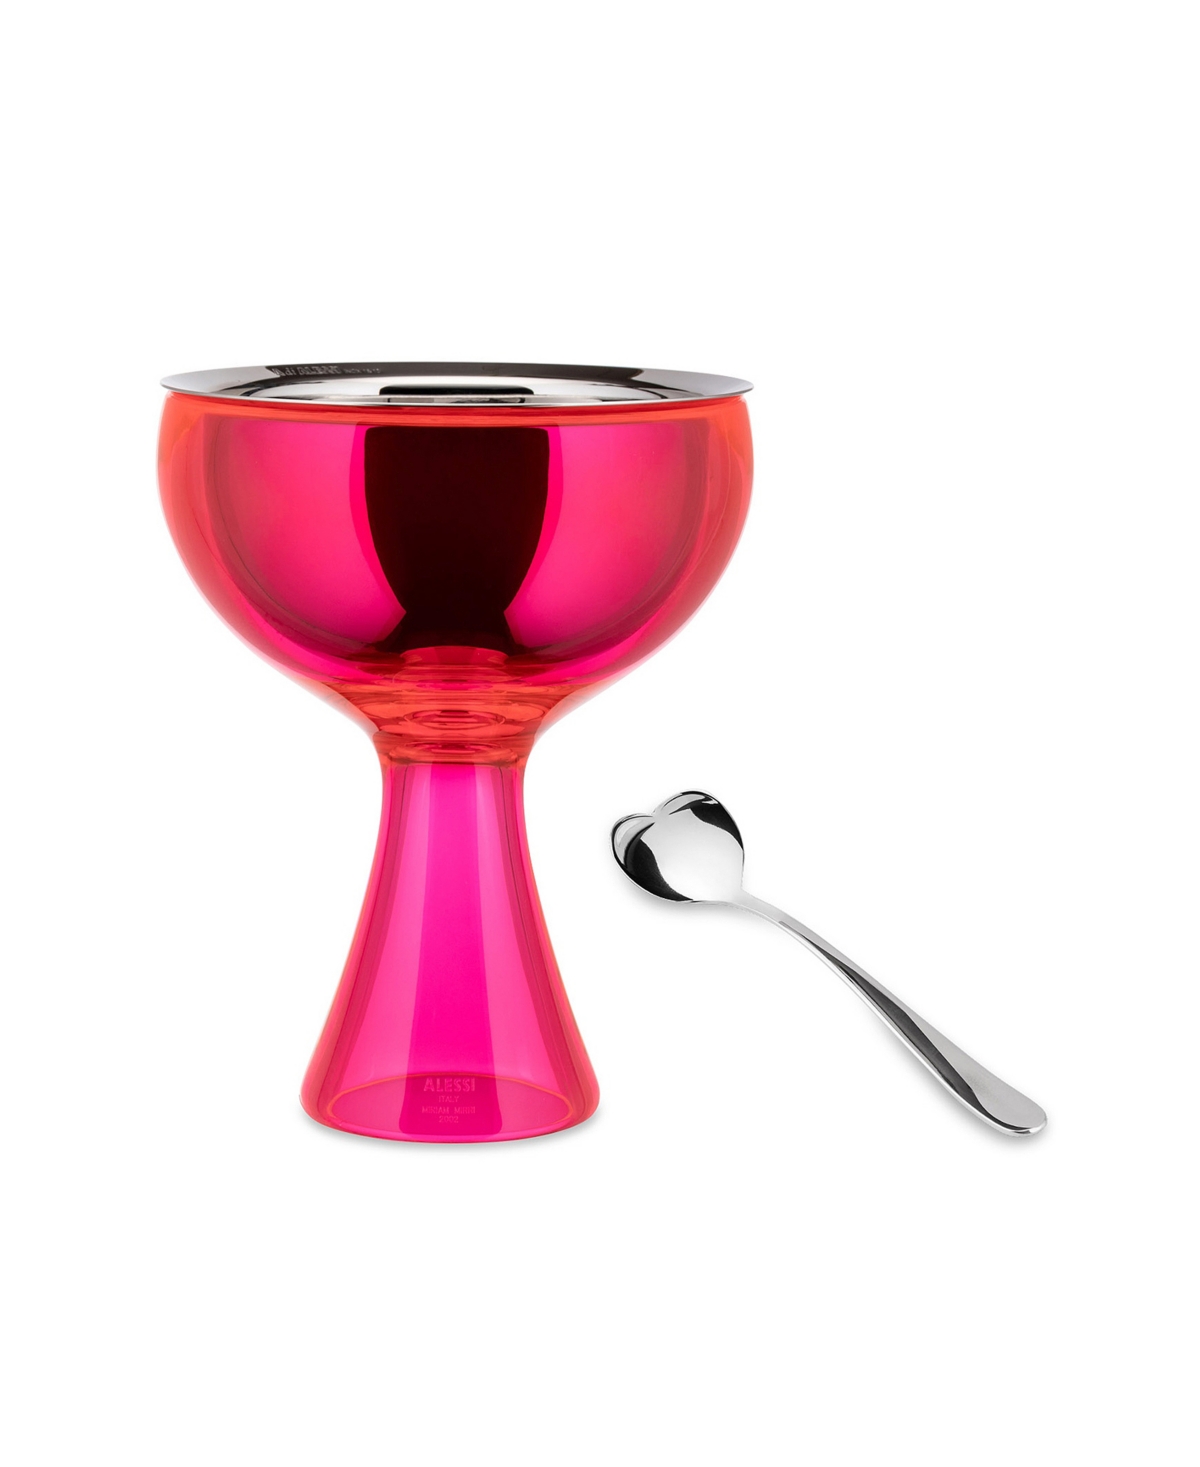 Alessi 1 Cup Ice Cream Bowl Spoon By Miriam Mirri In Pink